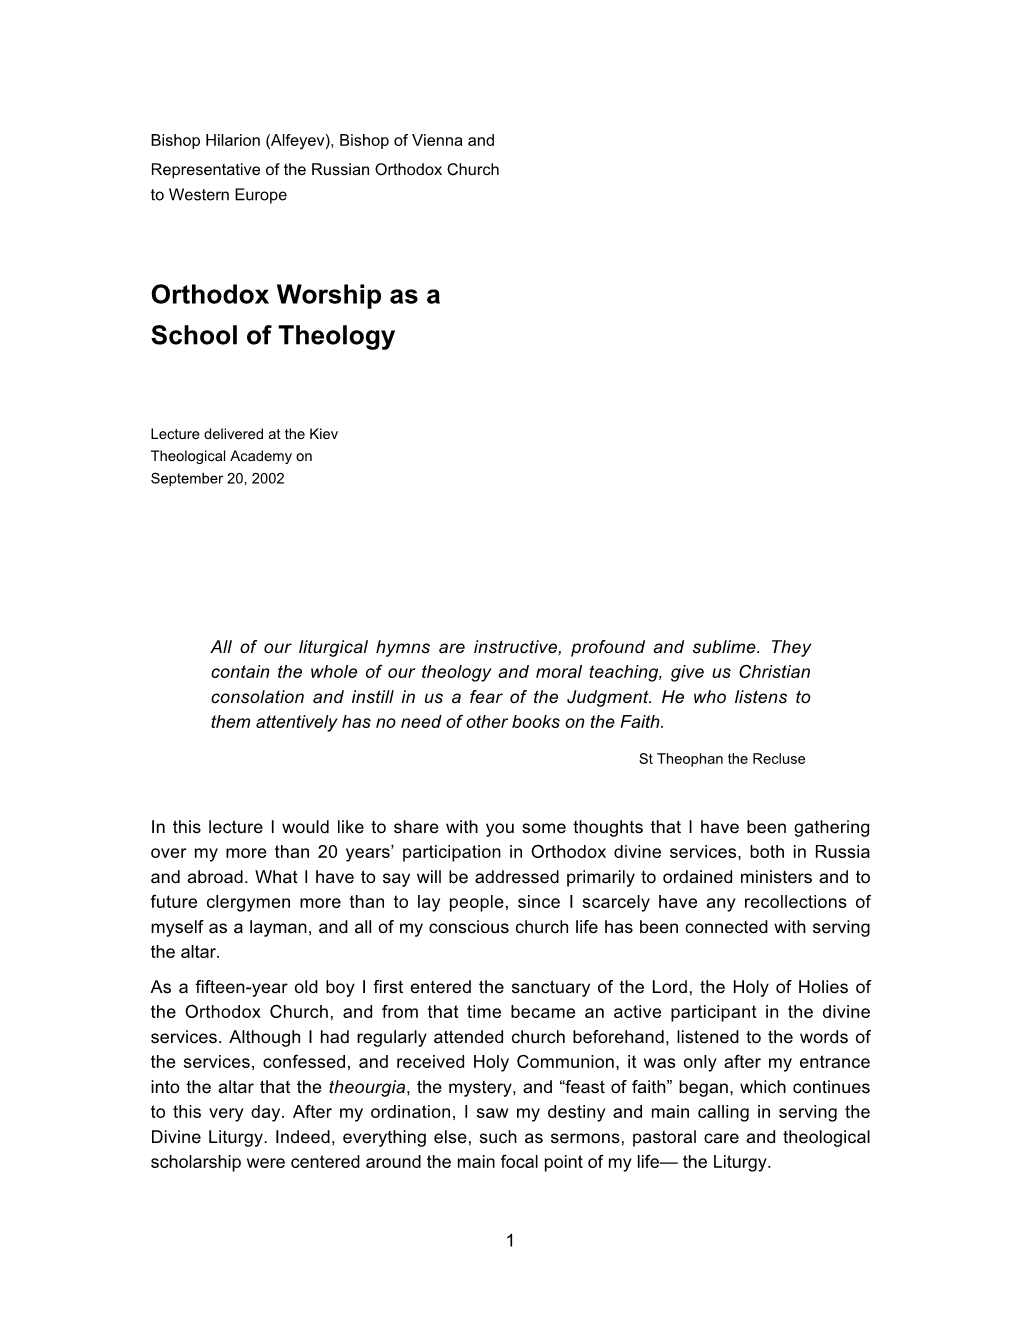 Orthodox Worship As a School of Theology